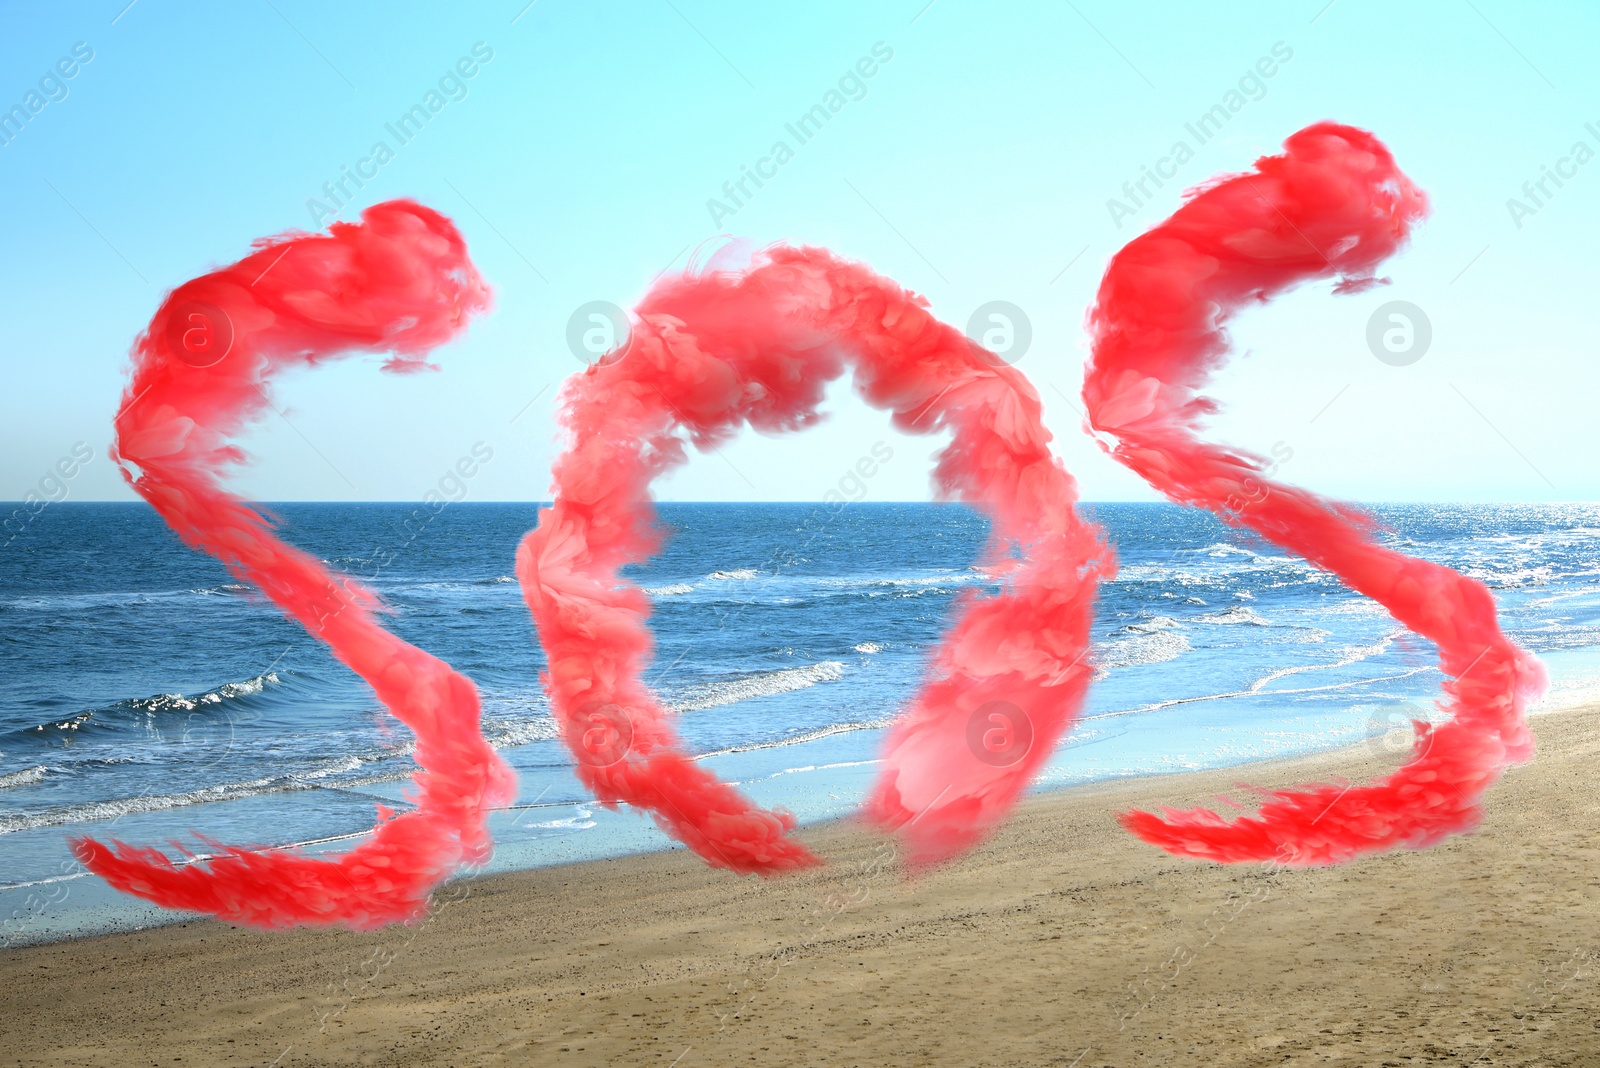 Image of Word SOS made of red smoke and view of seashore